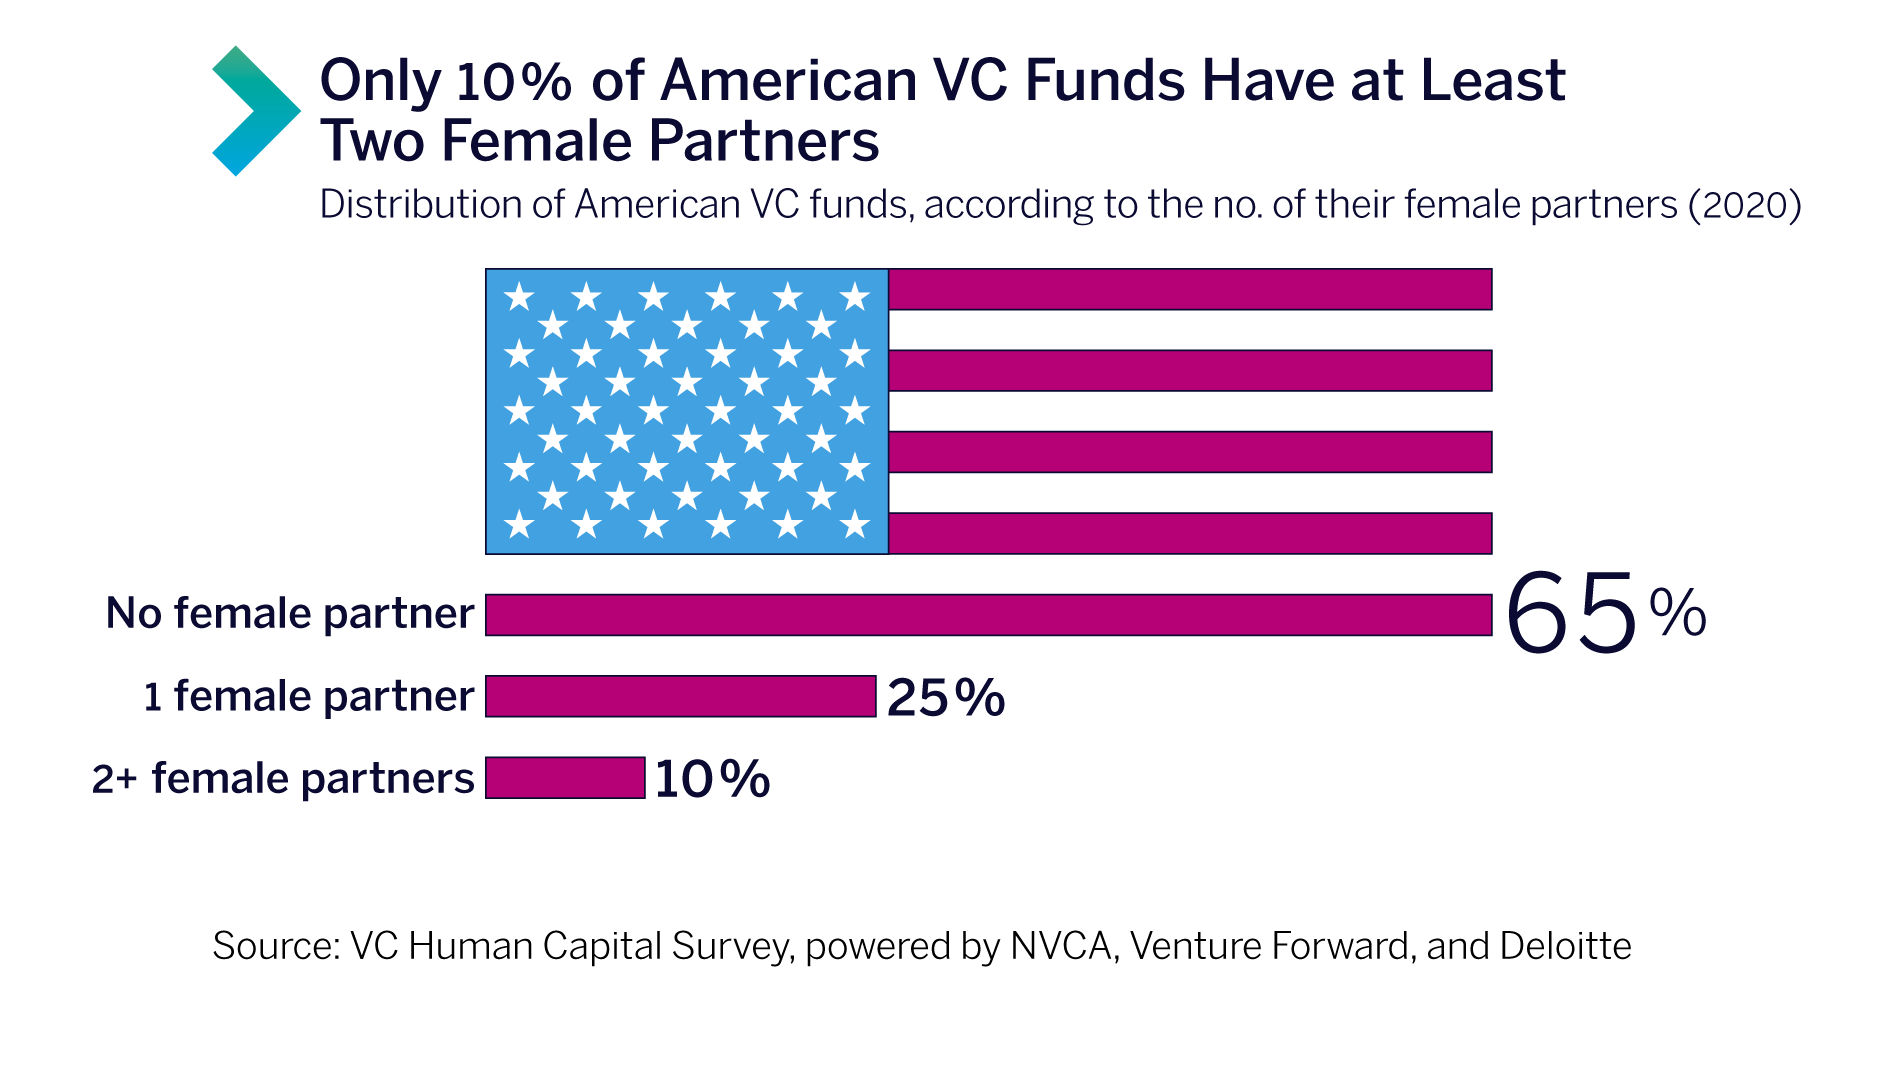 Only 10% of American VC Funds Have at Least Two Female Partners